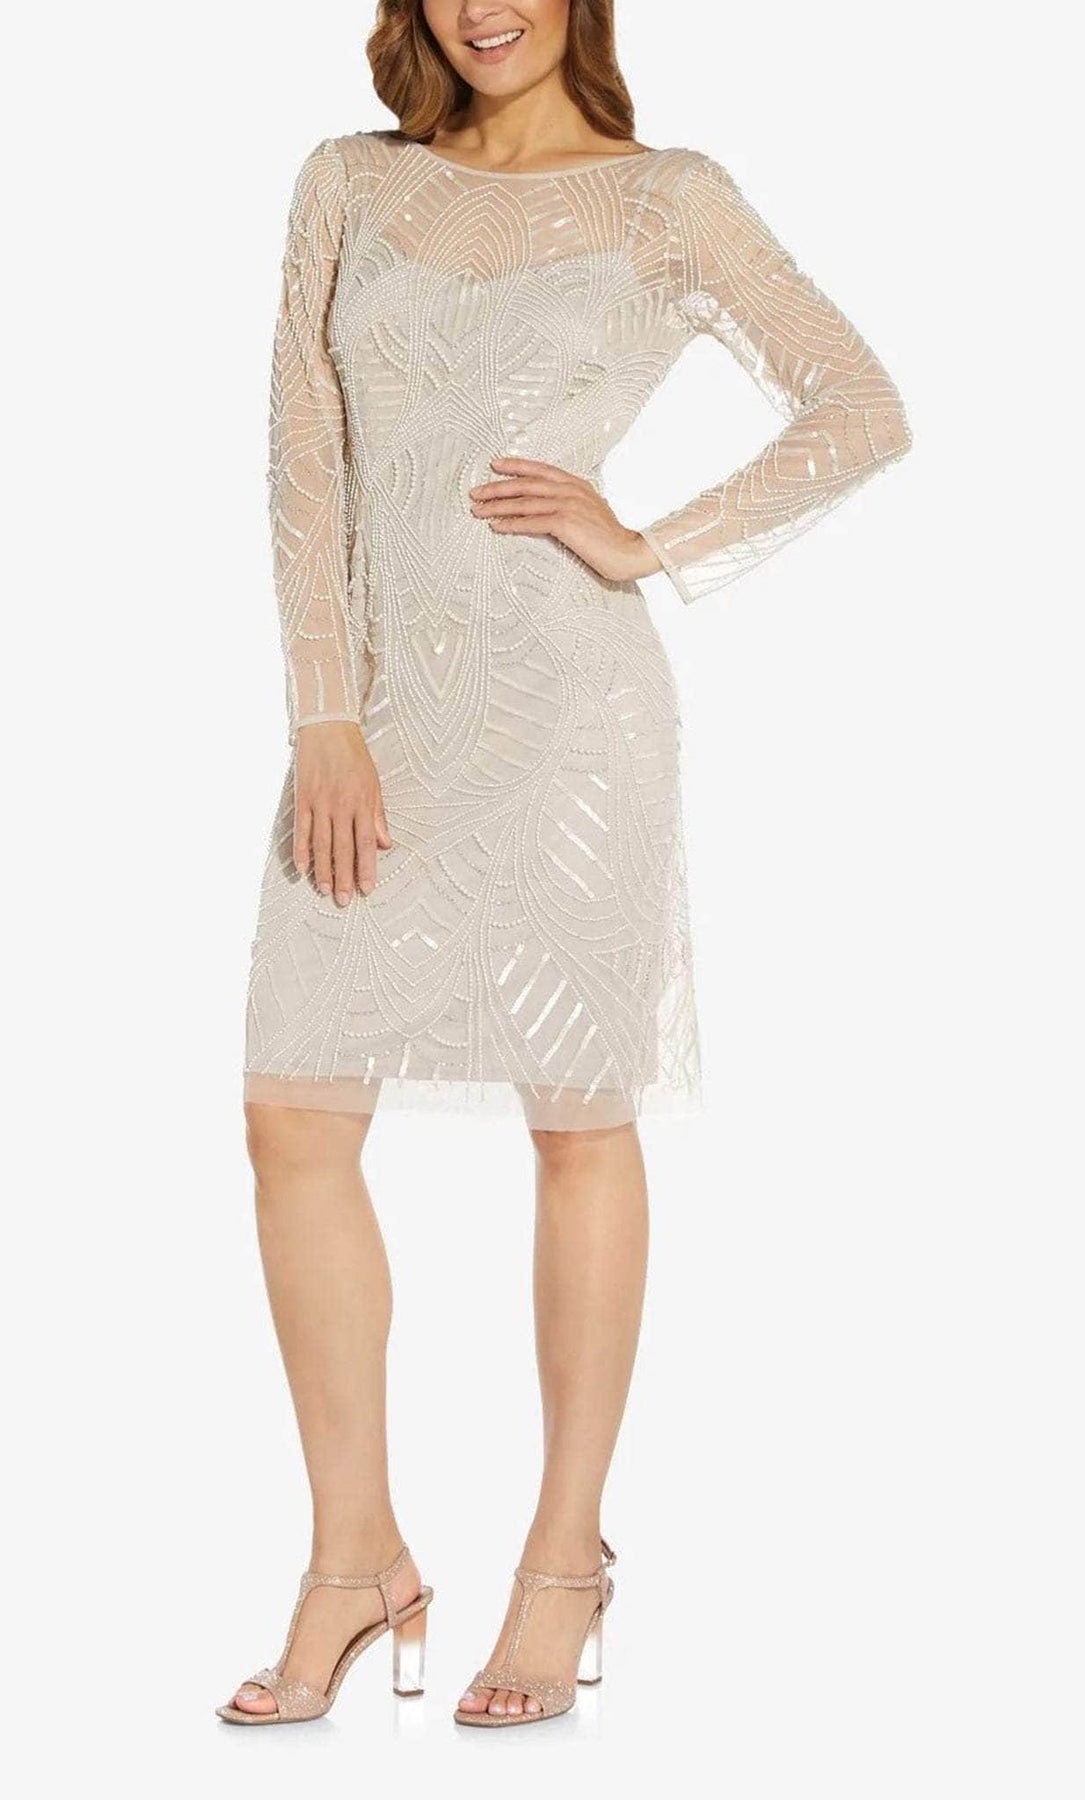 Adrianna Papell AP1E208662 - Long Sleeve Illusion Cocktail Dress Cocktail Dresses 0 / Biscotti